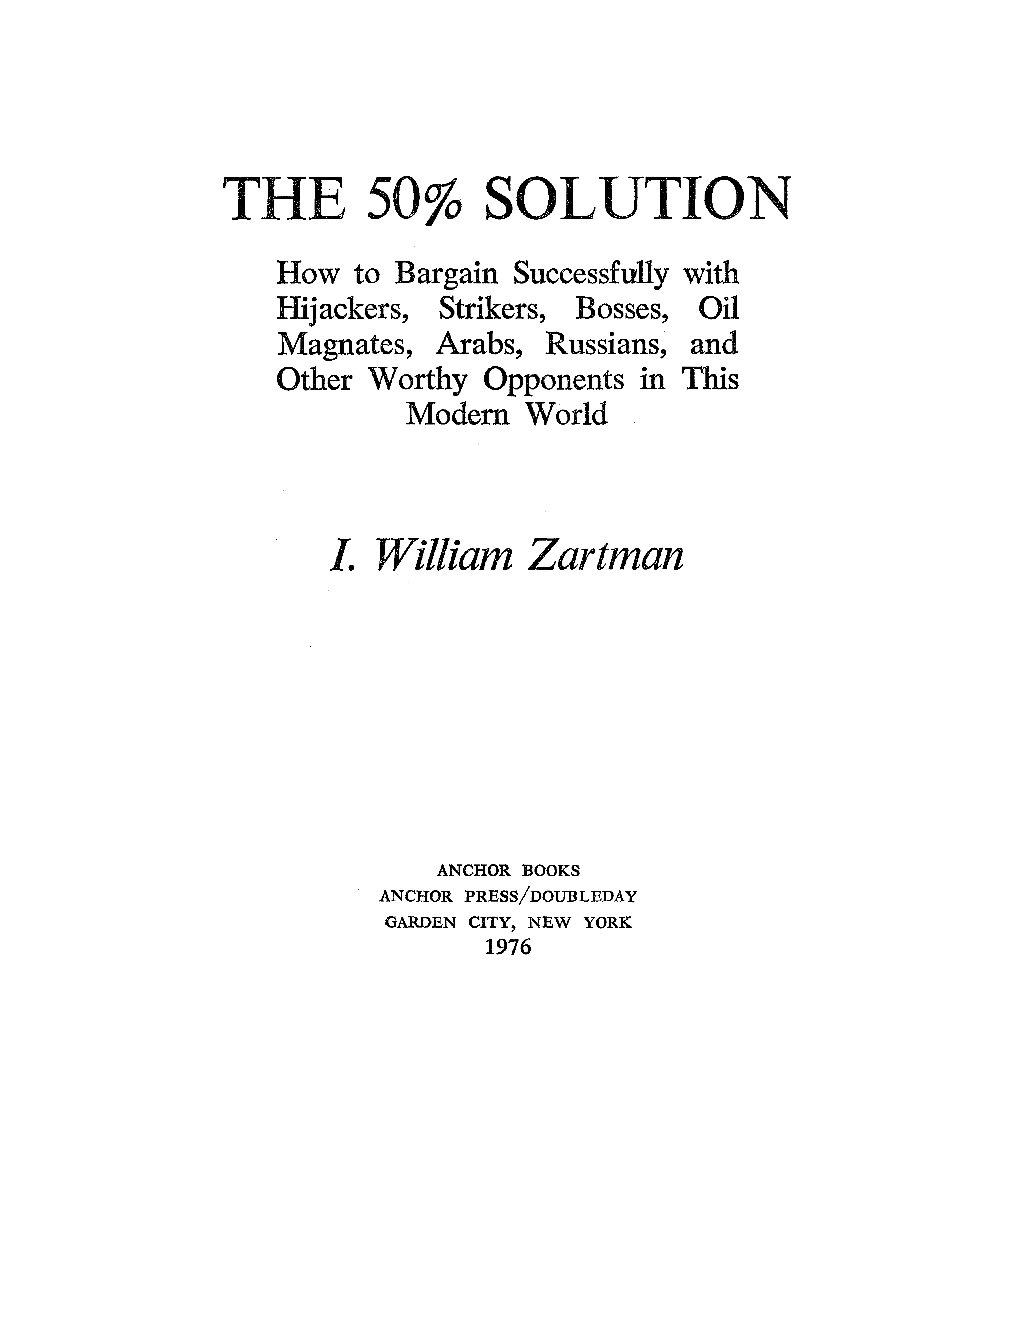 THE 50% SOLUTION How to Bargain Successfully with Hijackers, Strikers, Bosses, Oil Magnates, Arabs, Russians, and Other Worthy Opponents in This Modern World